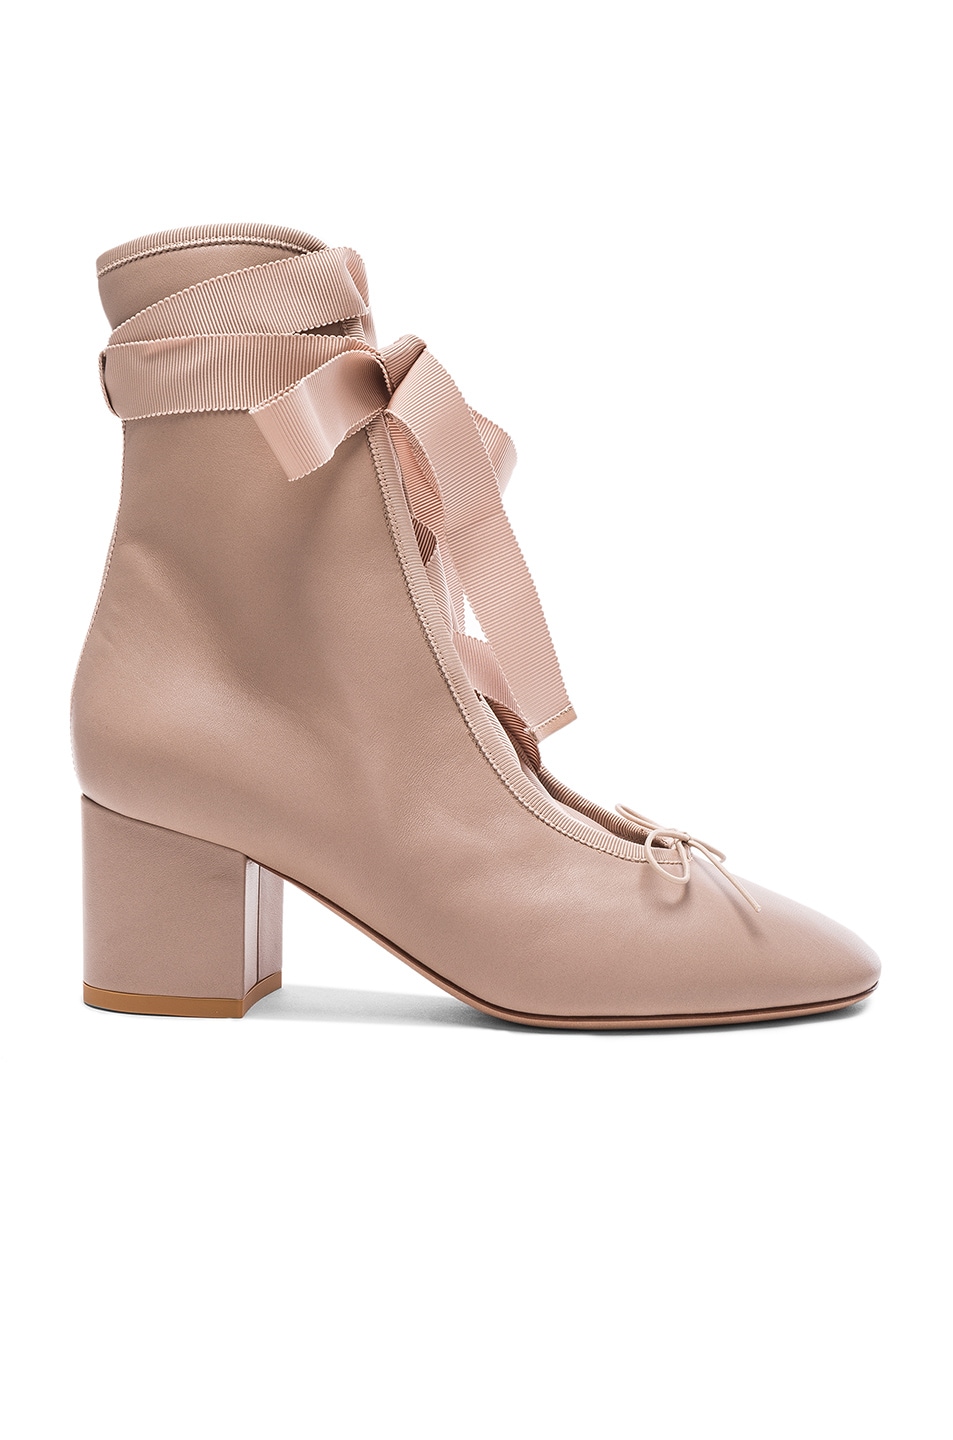 Image 1 of Valentino Garavani Leather Ballet Booties in Poudre